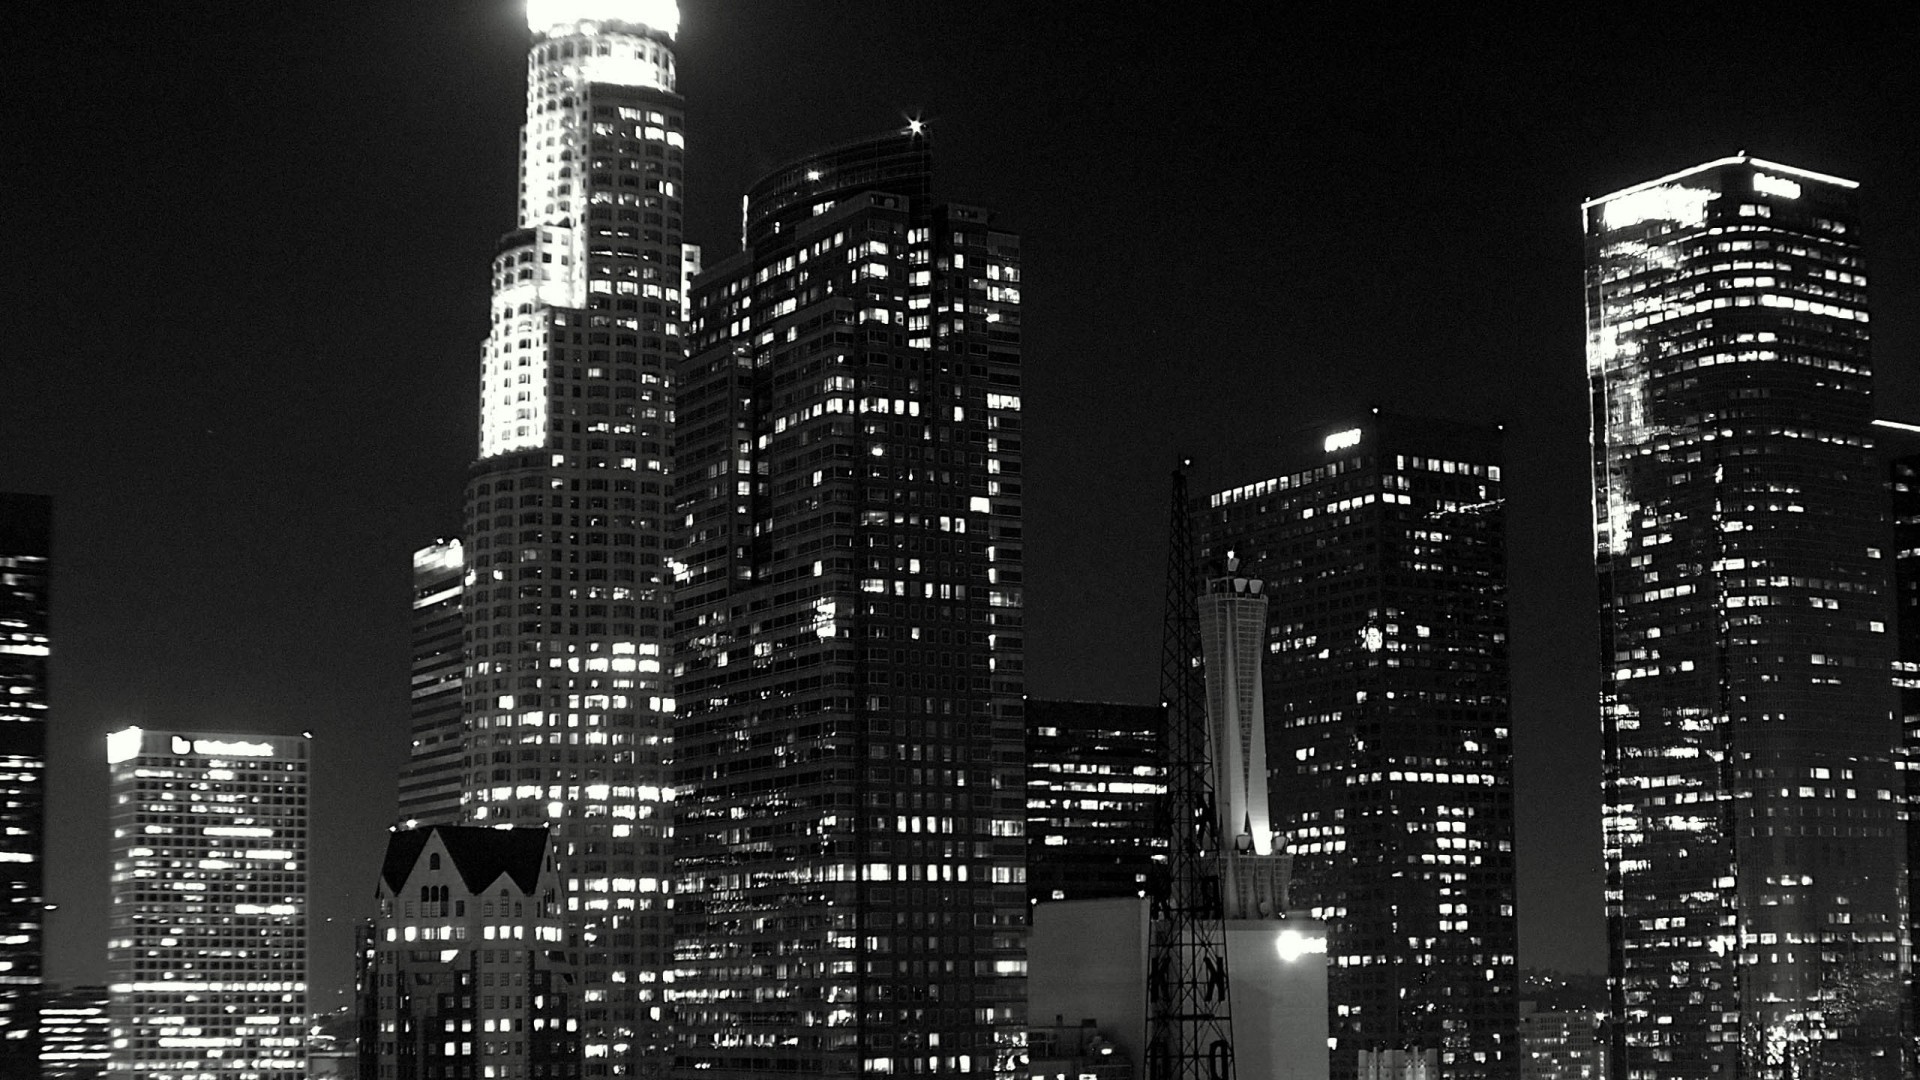 night, Black and white skyscrapers backgrounds